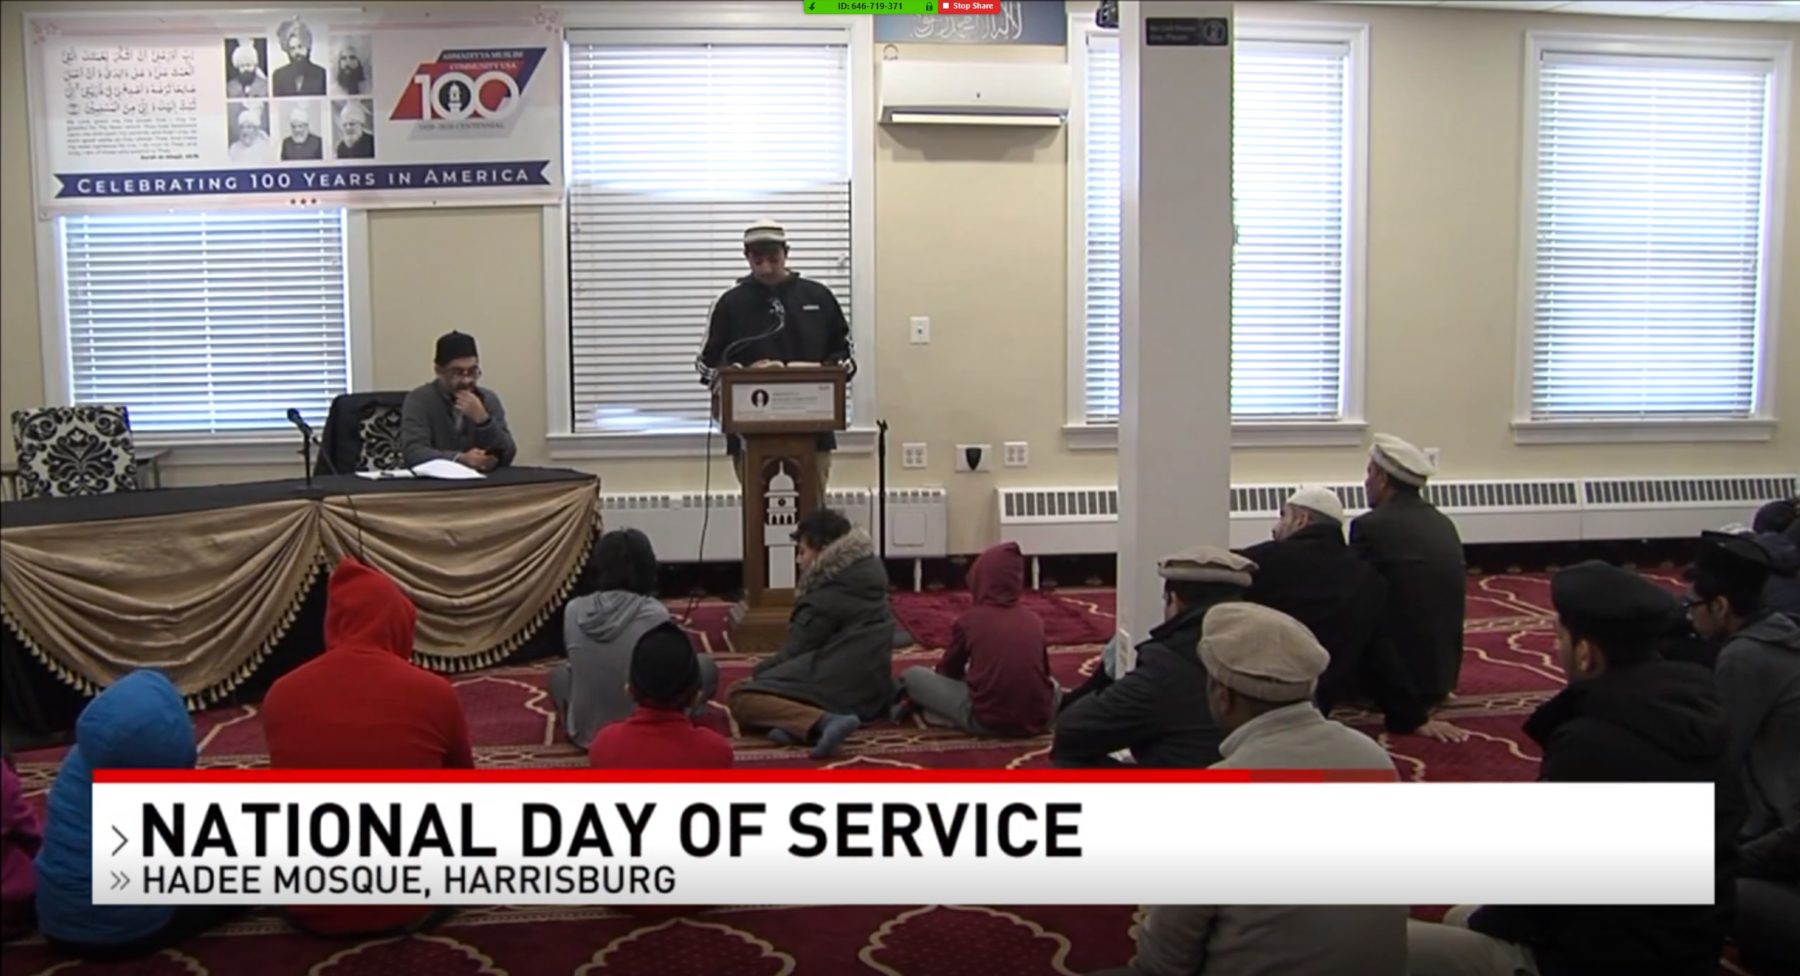 Hadee Mosque in Harrisburg PA commemorating National Day of Service